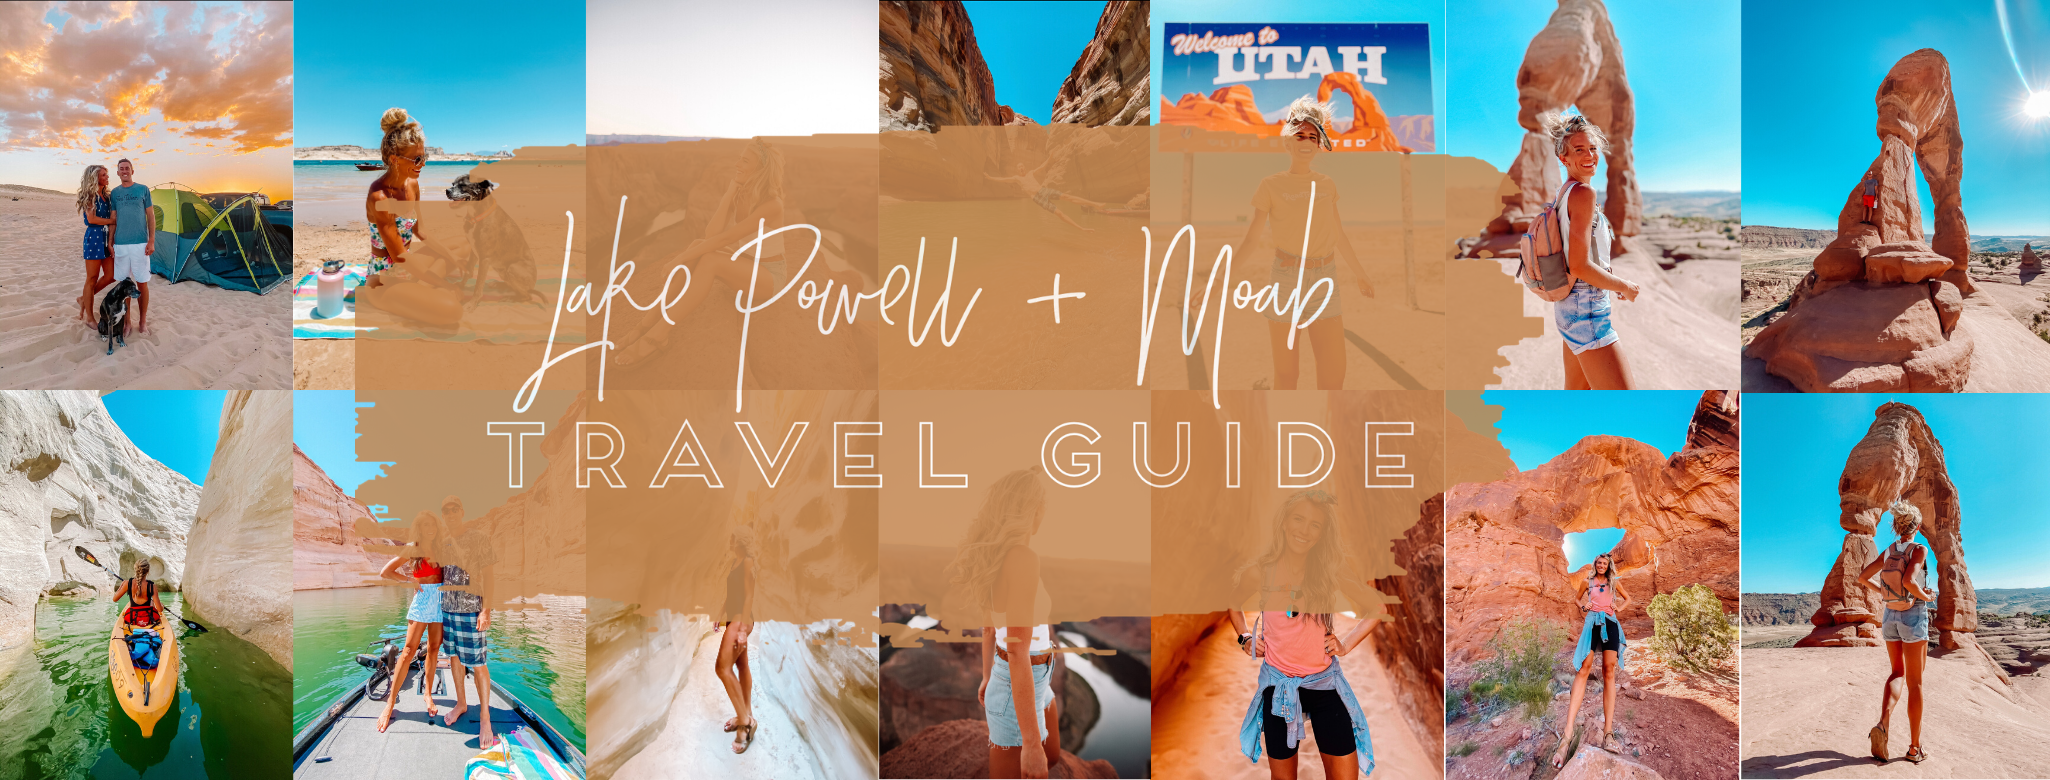 lake powell and moab travel guide